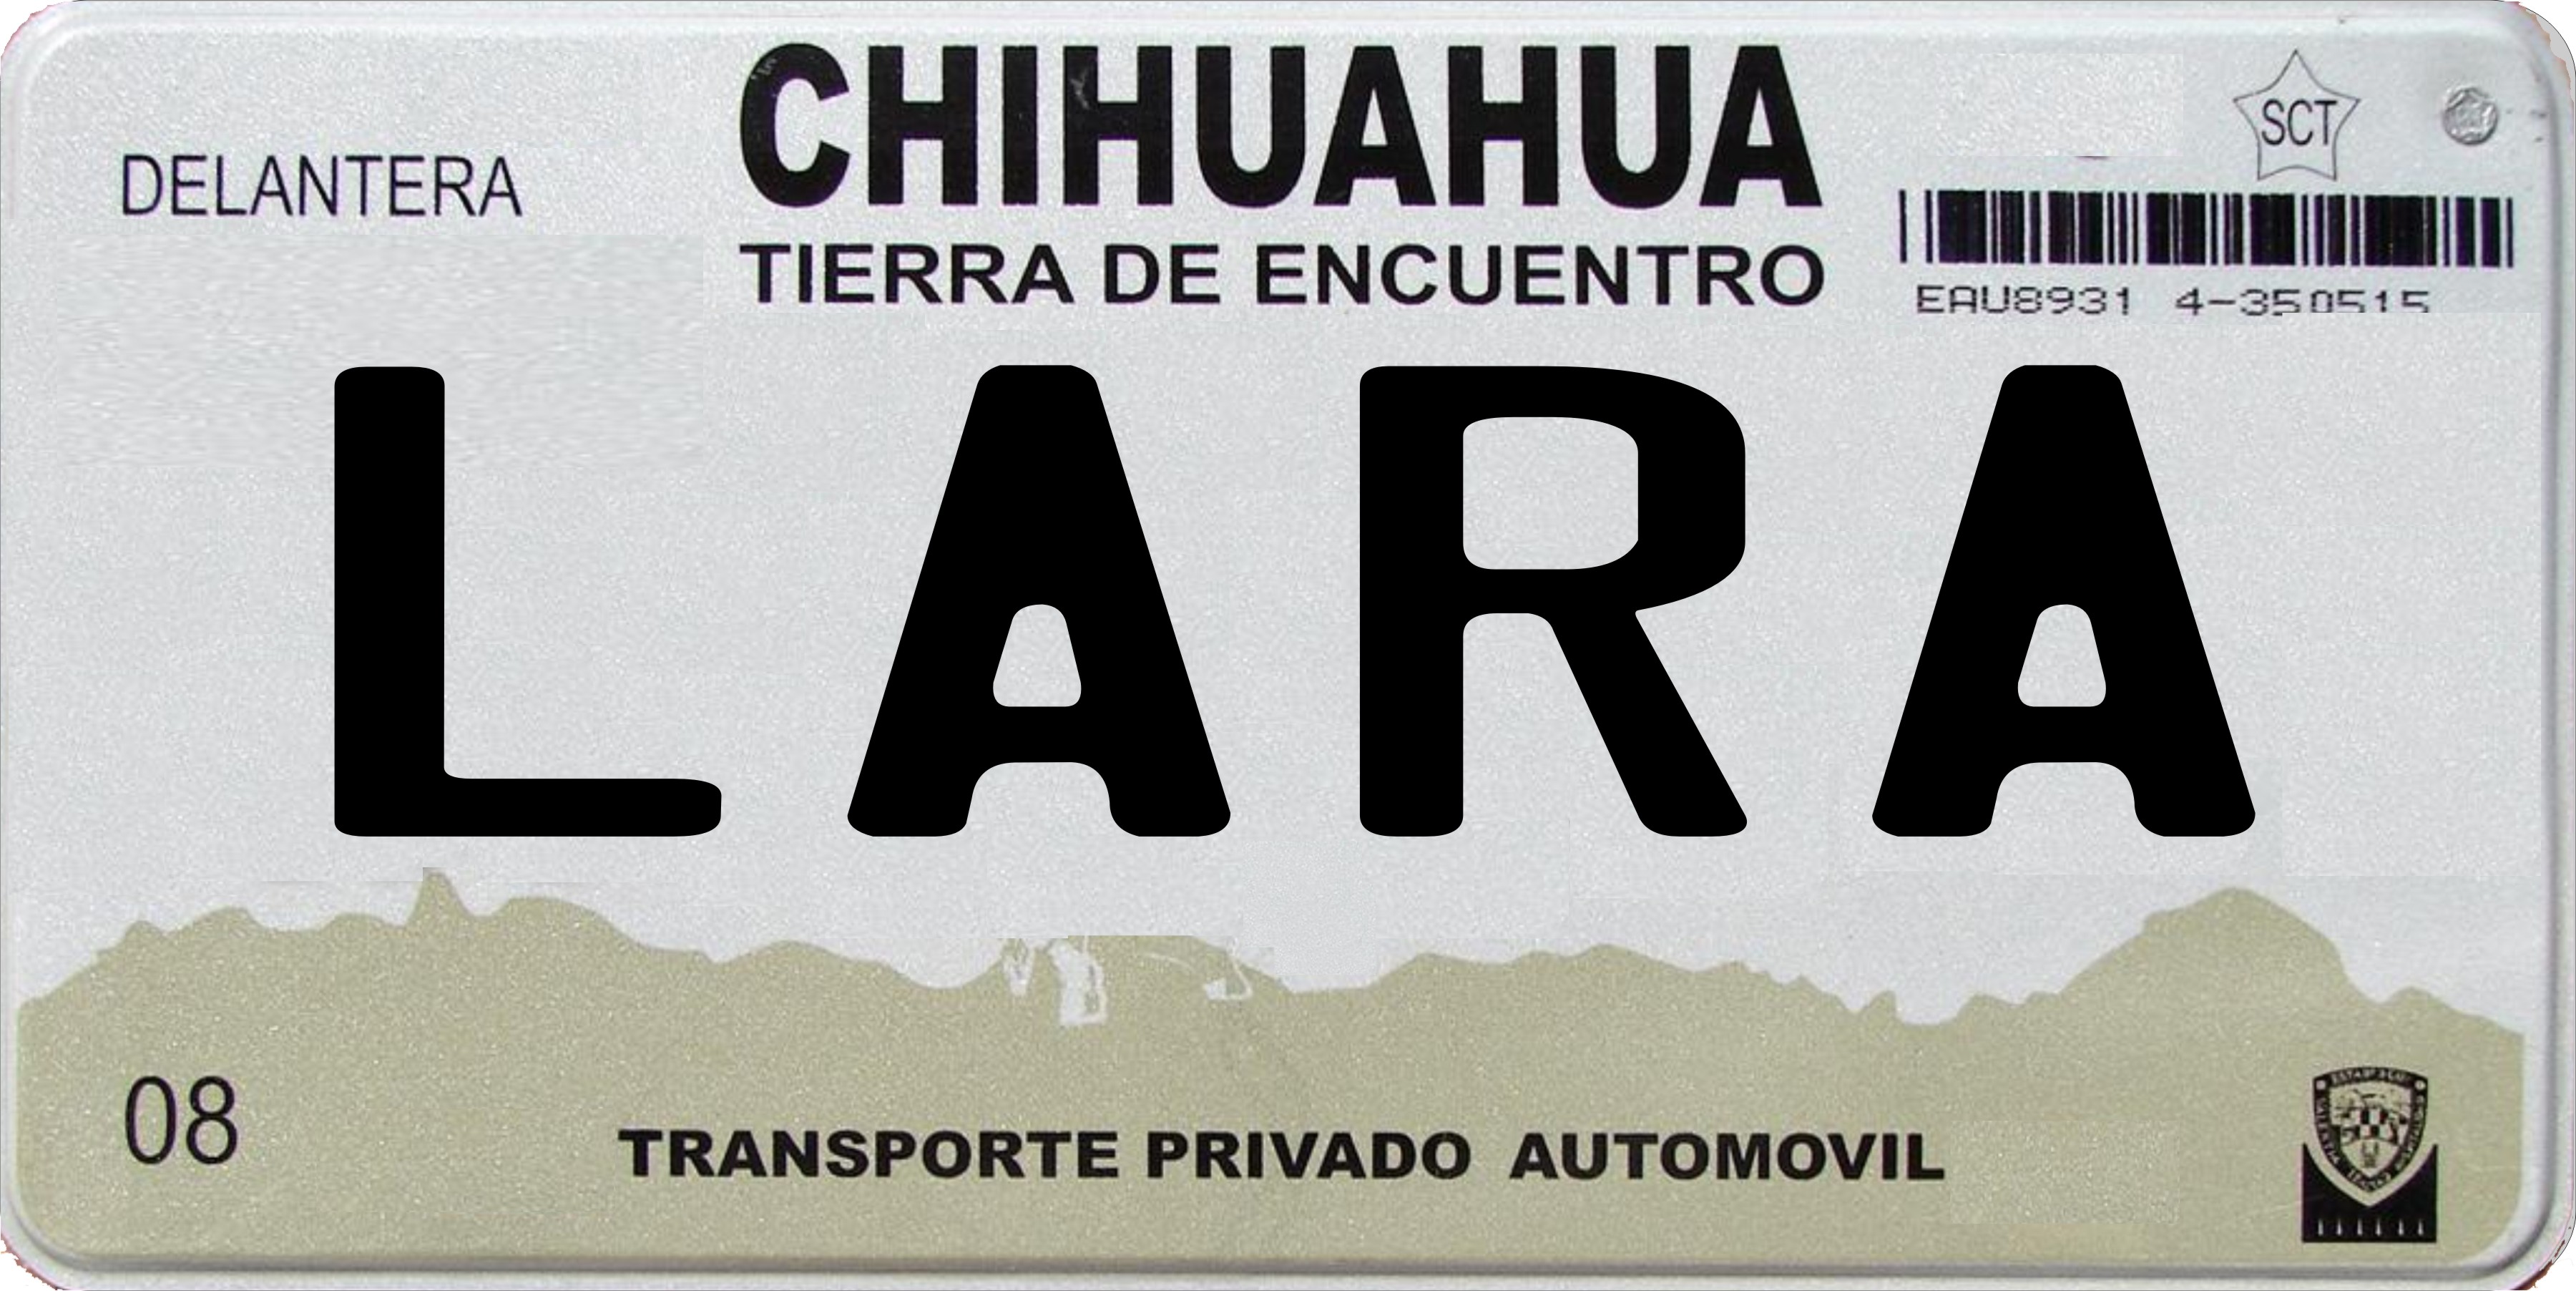 Mexico Chihuahua Photo LICENSE PLATE Free Personalization on this PLATE